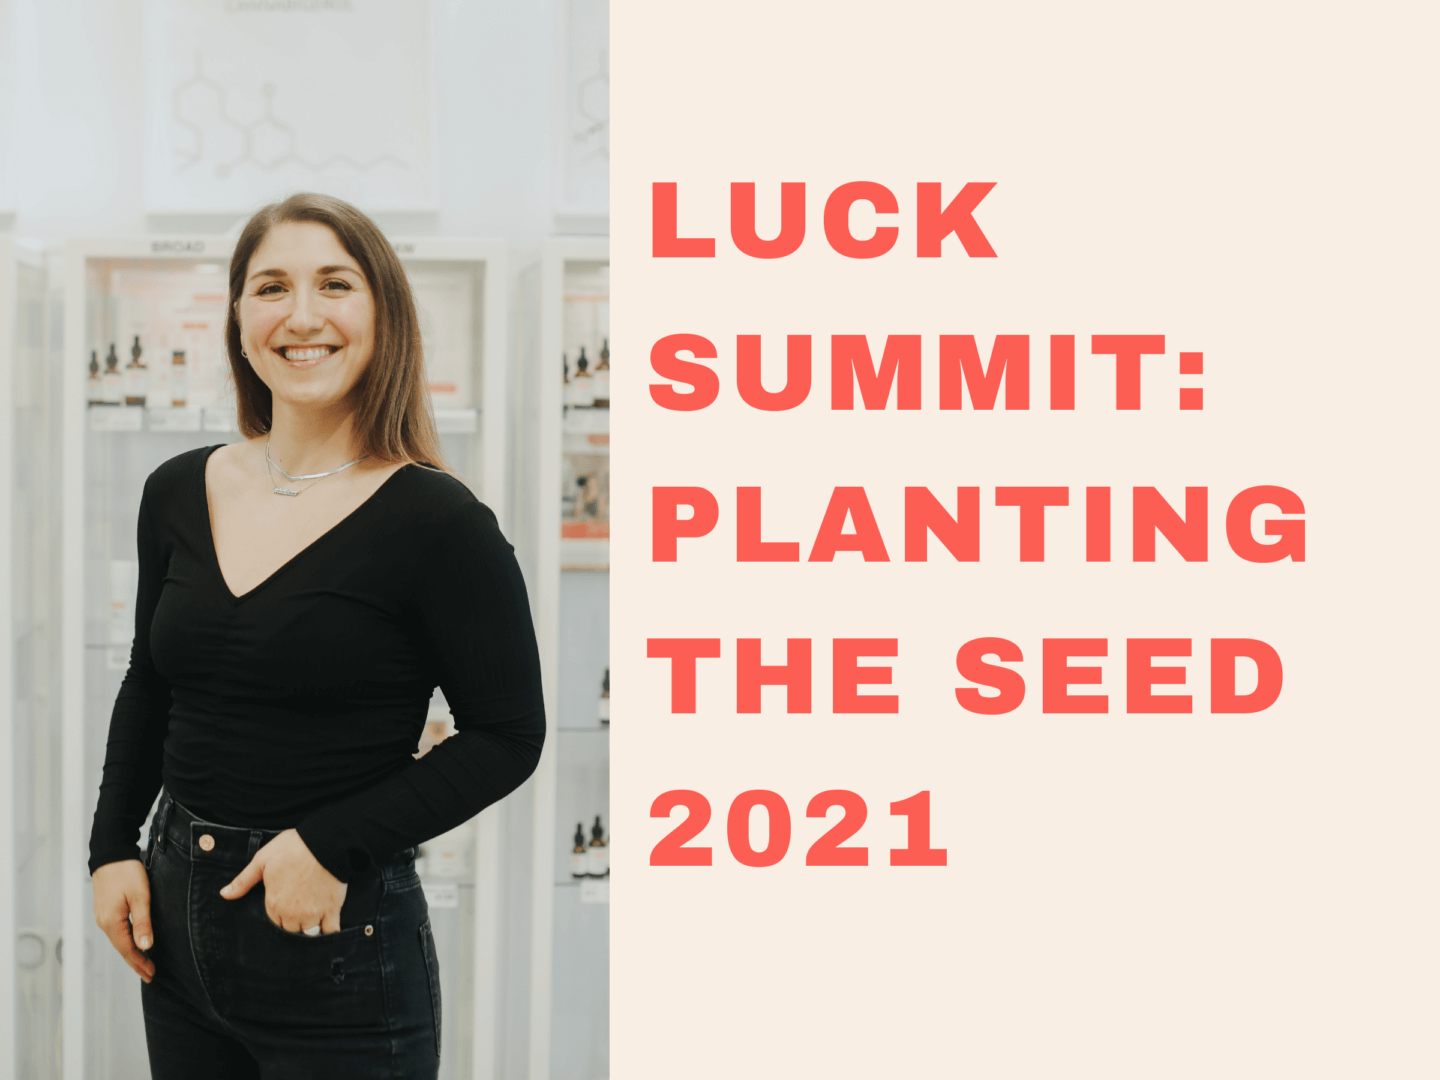 LUCK SUMMIT: PLANTING THE SEED 2021